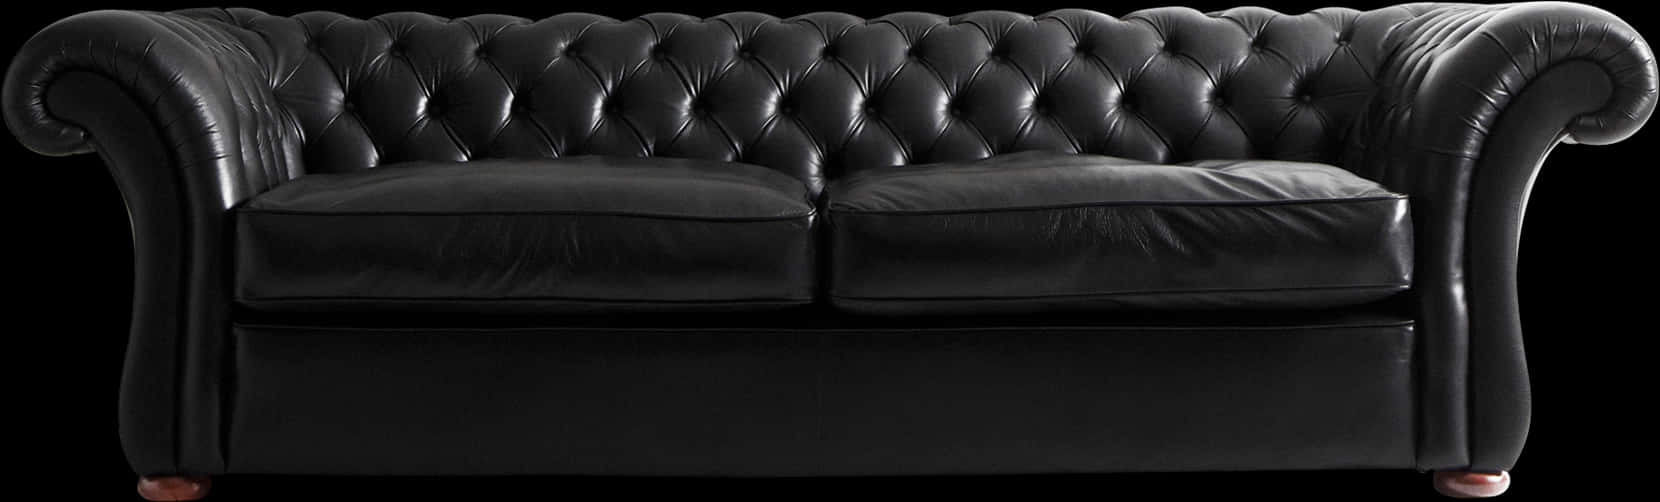 Elegant Black Leather Chesterfield Sofa PNG image